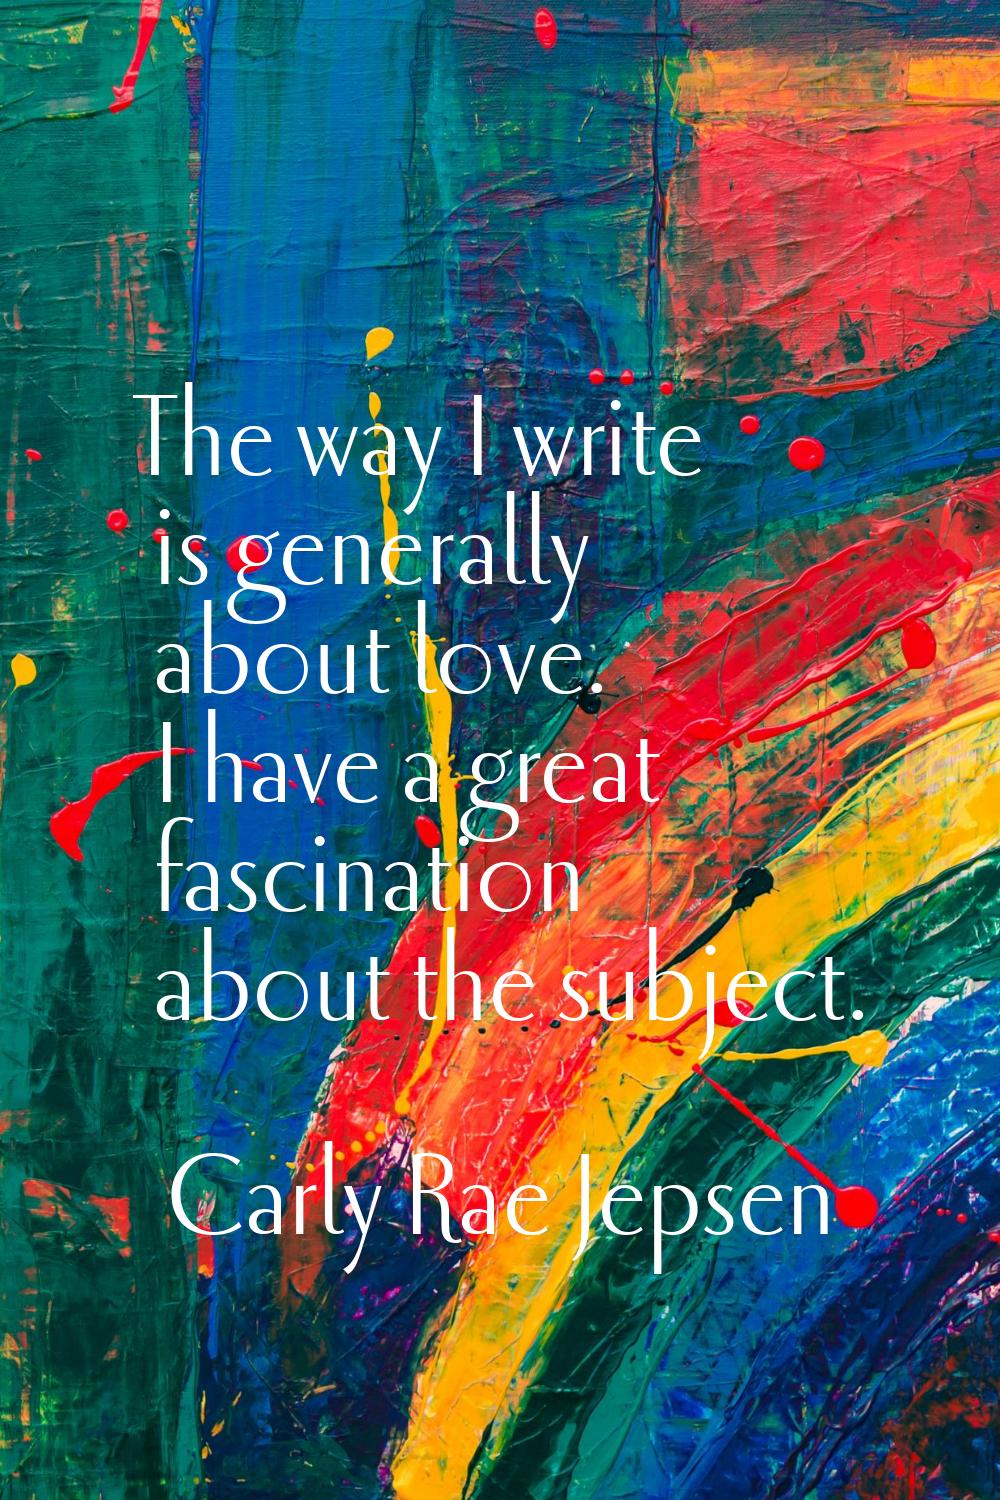 The way I write is generally about love. I have a great fascination about the subject.